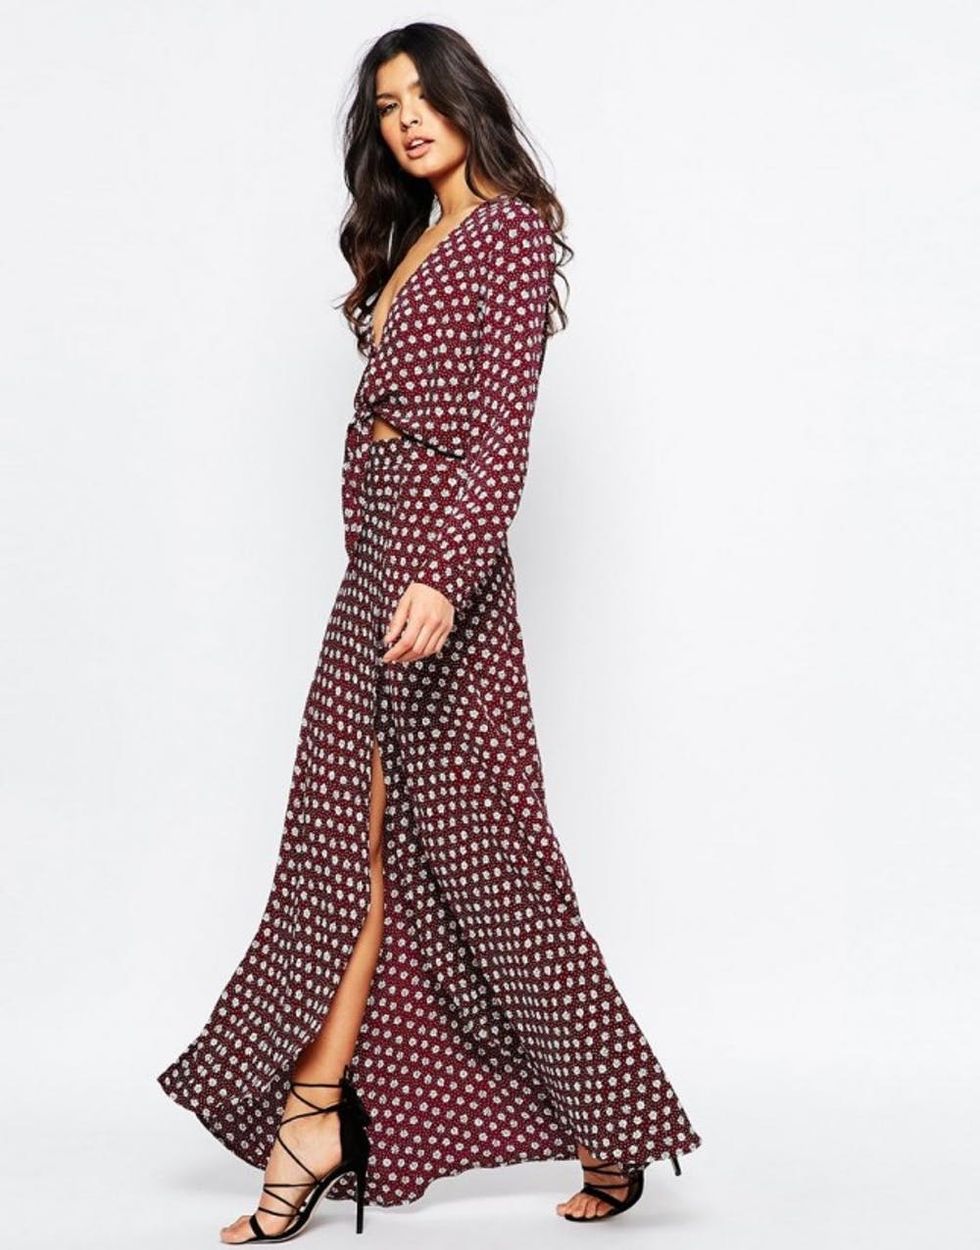 21 Trendy Spring Prints You Didn’t Know You Needed - Brit + Co